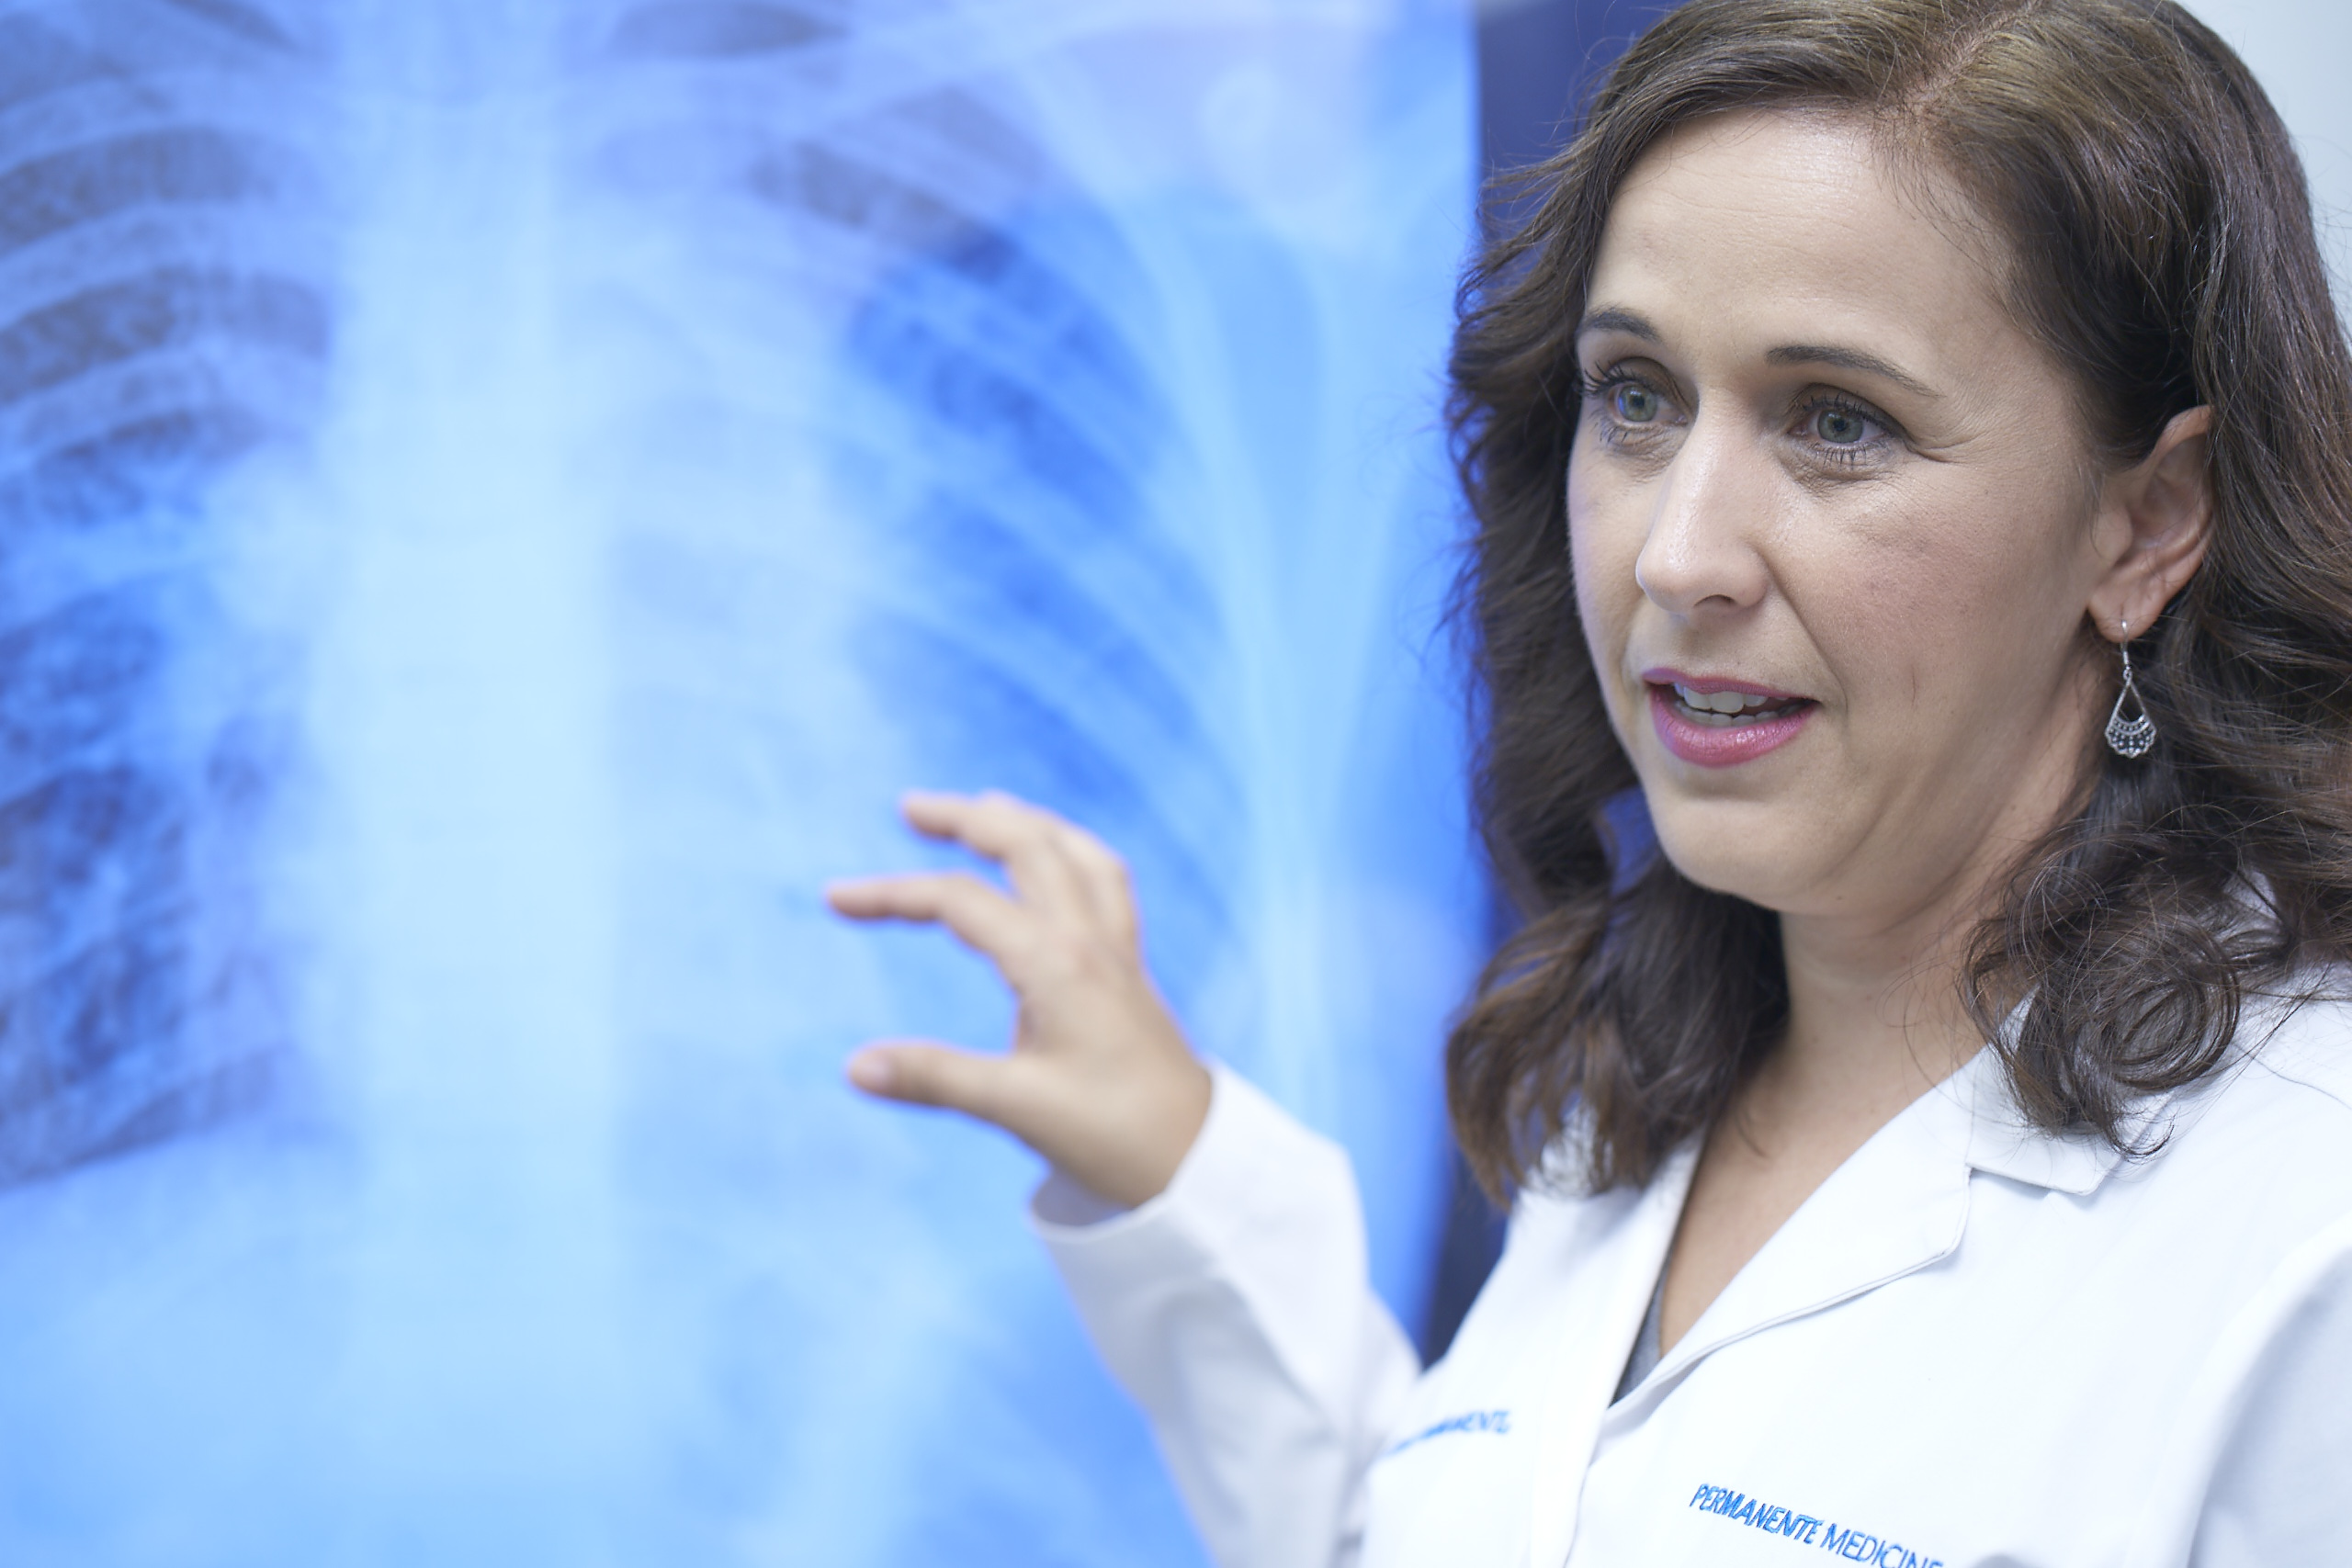 Permanente physician in front of lung x-ray